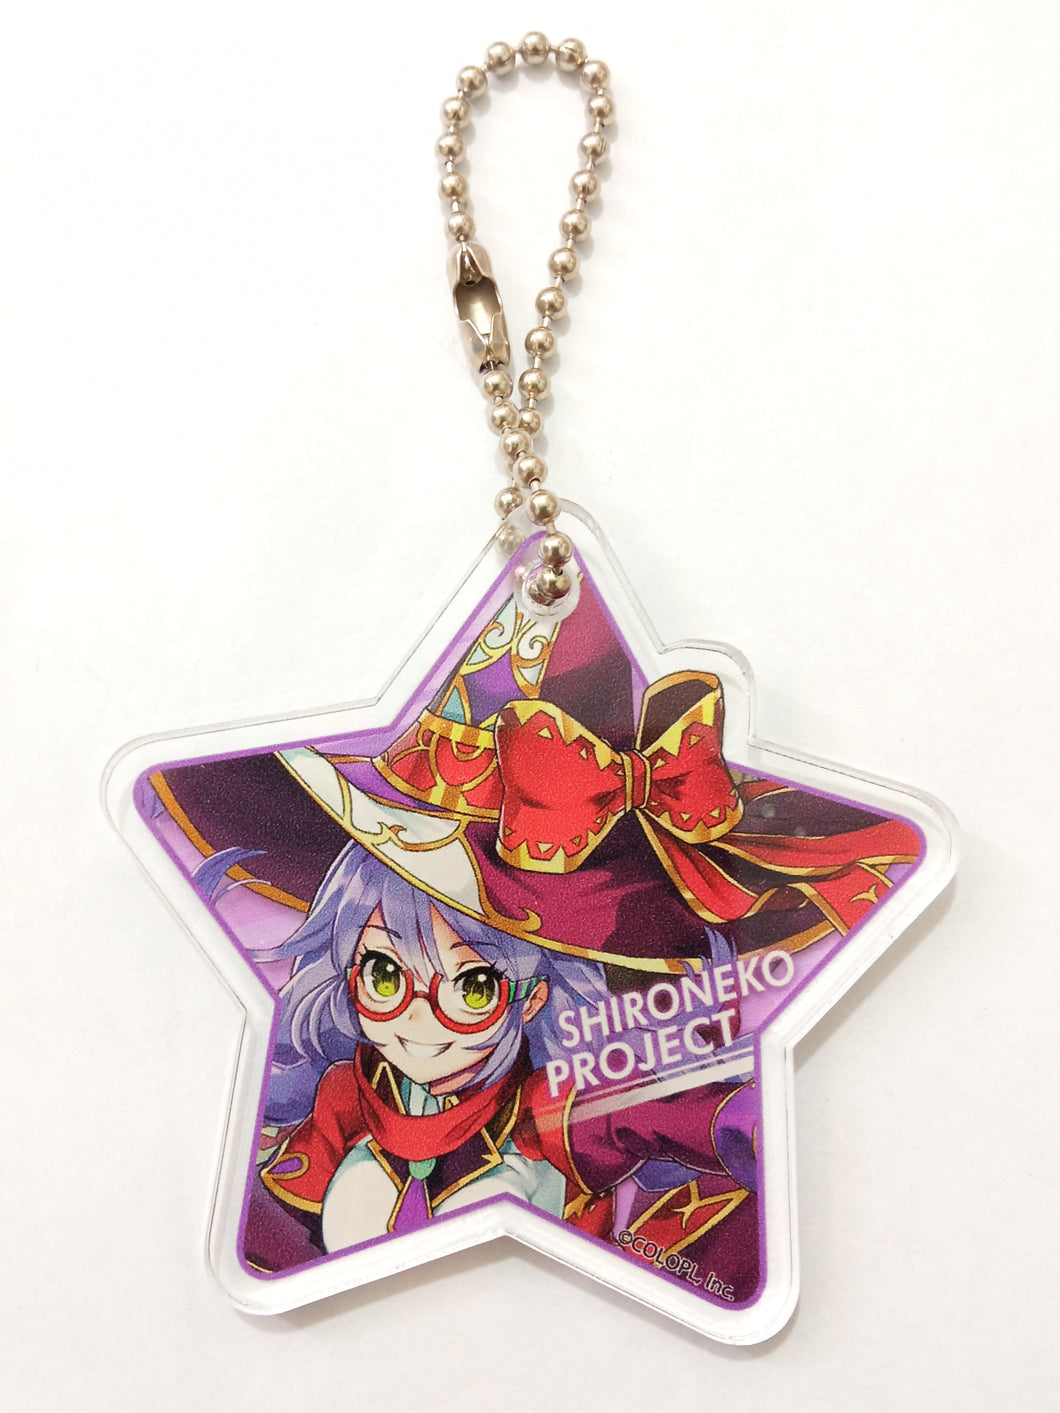 White Cat Project Star-shaped Trading Acrylic Keychain Animate Limited 